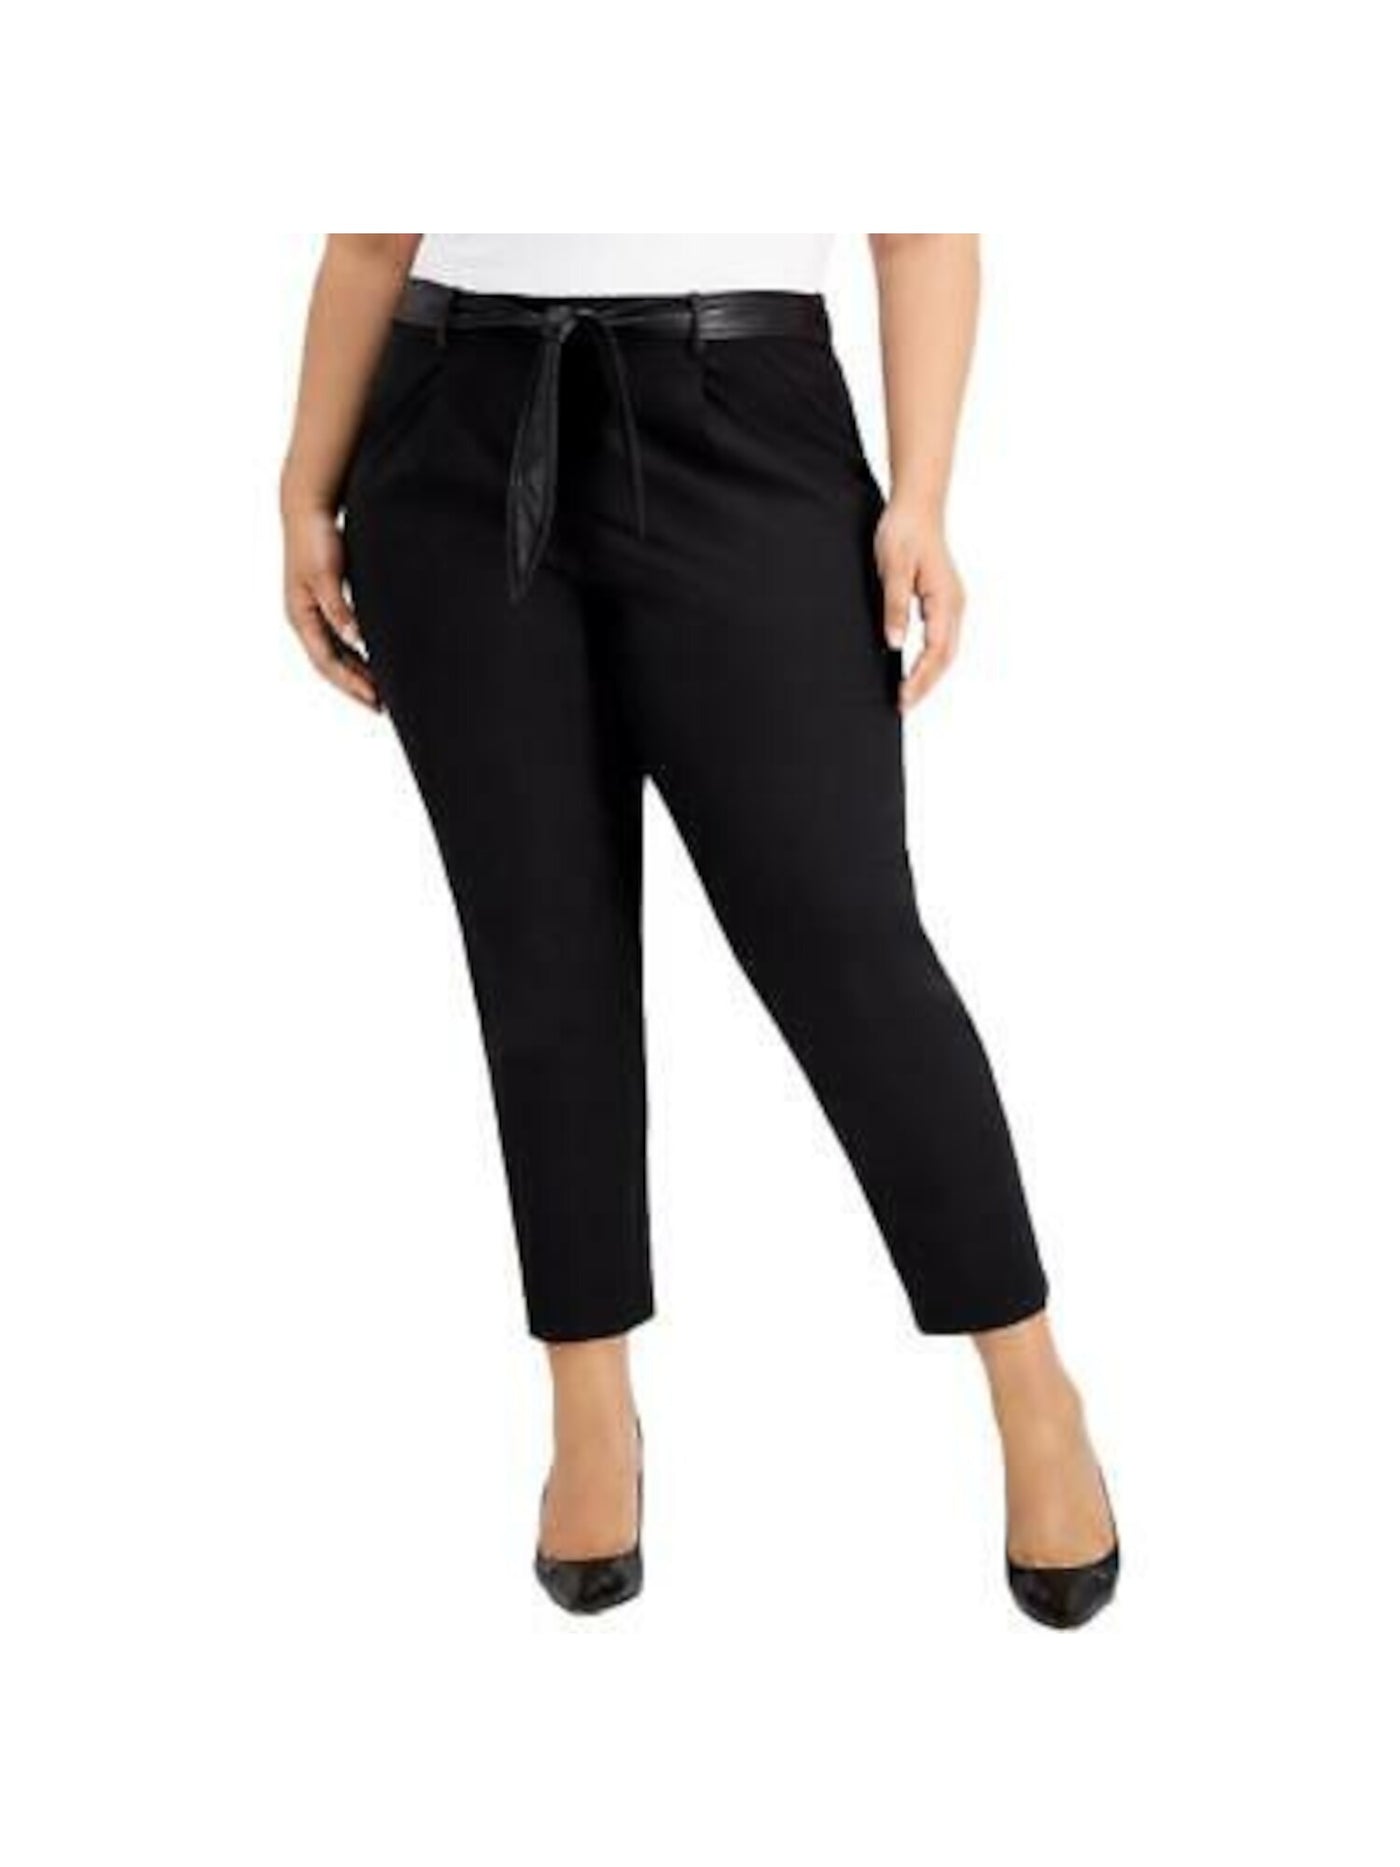 CALVIN KLEIN Womens Black Stretch Belted Zippered Wear To Work Cropped Pants Plus 22W